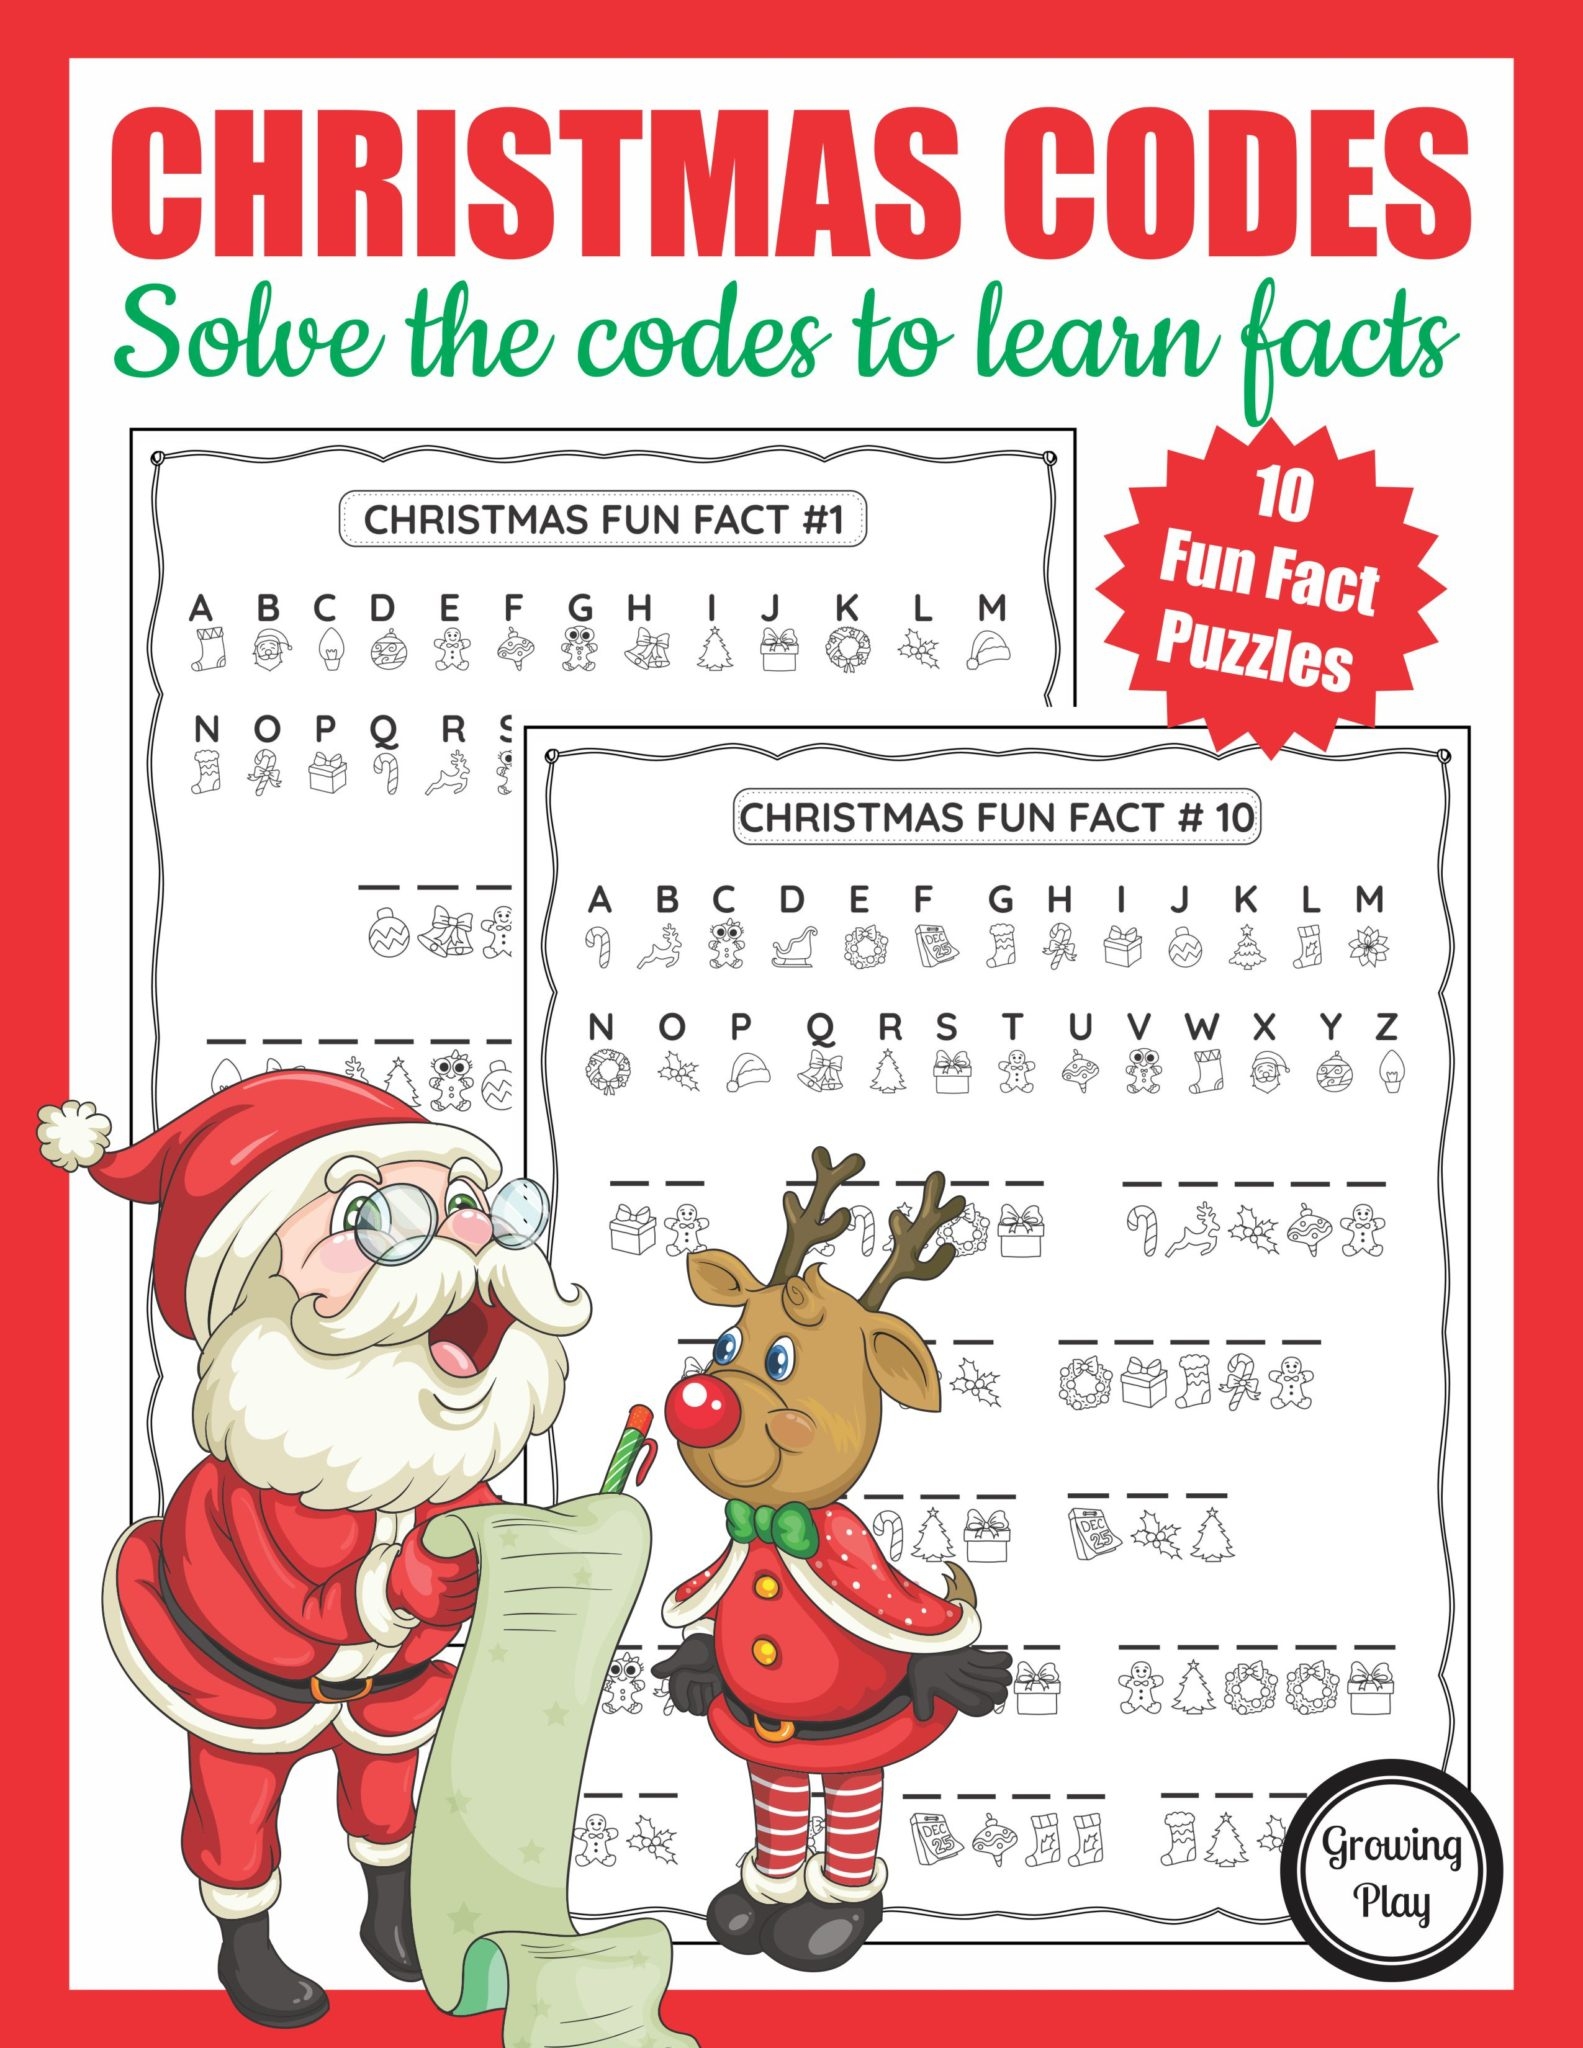 Christmas Code Free Sample Page Growing Play - Crack The Code Worksheets Printable Free